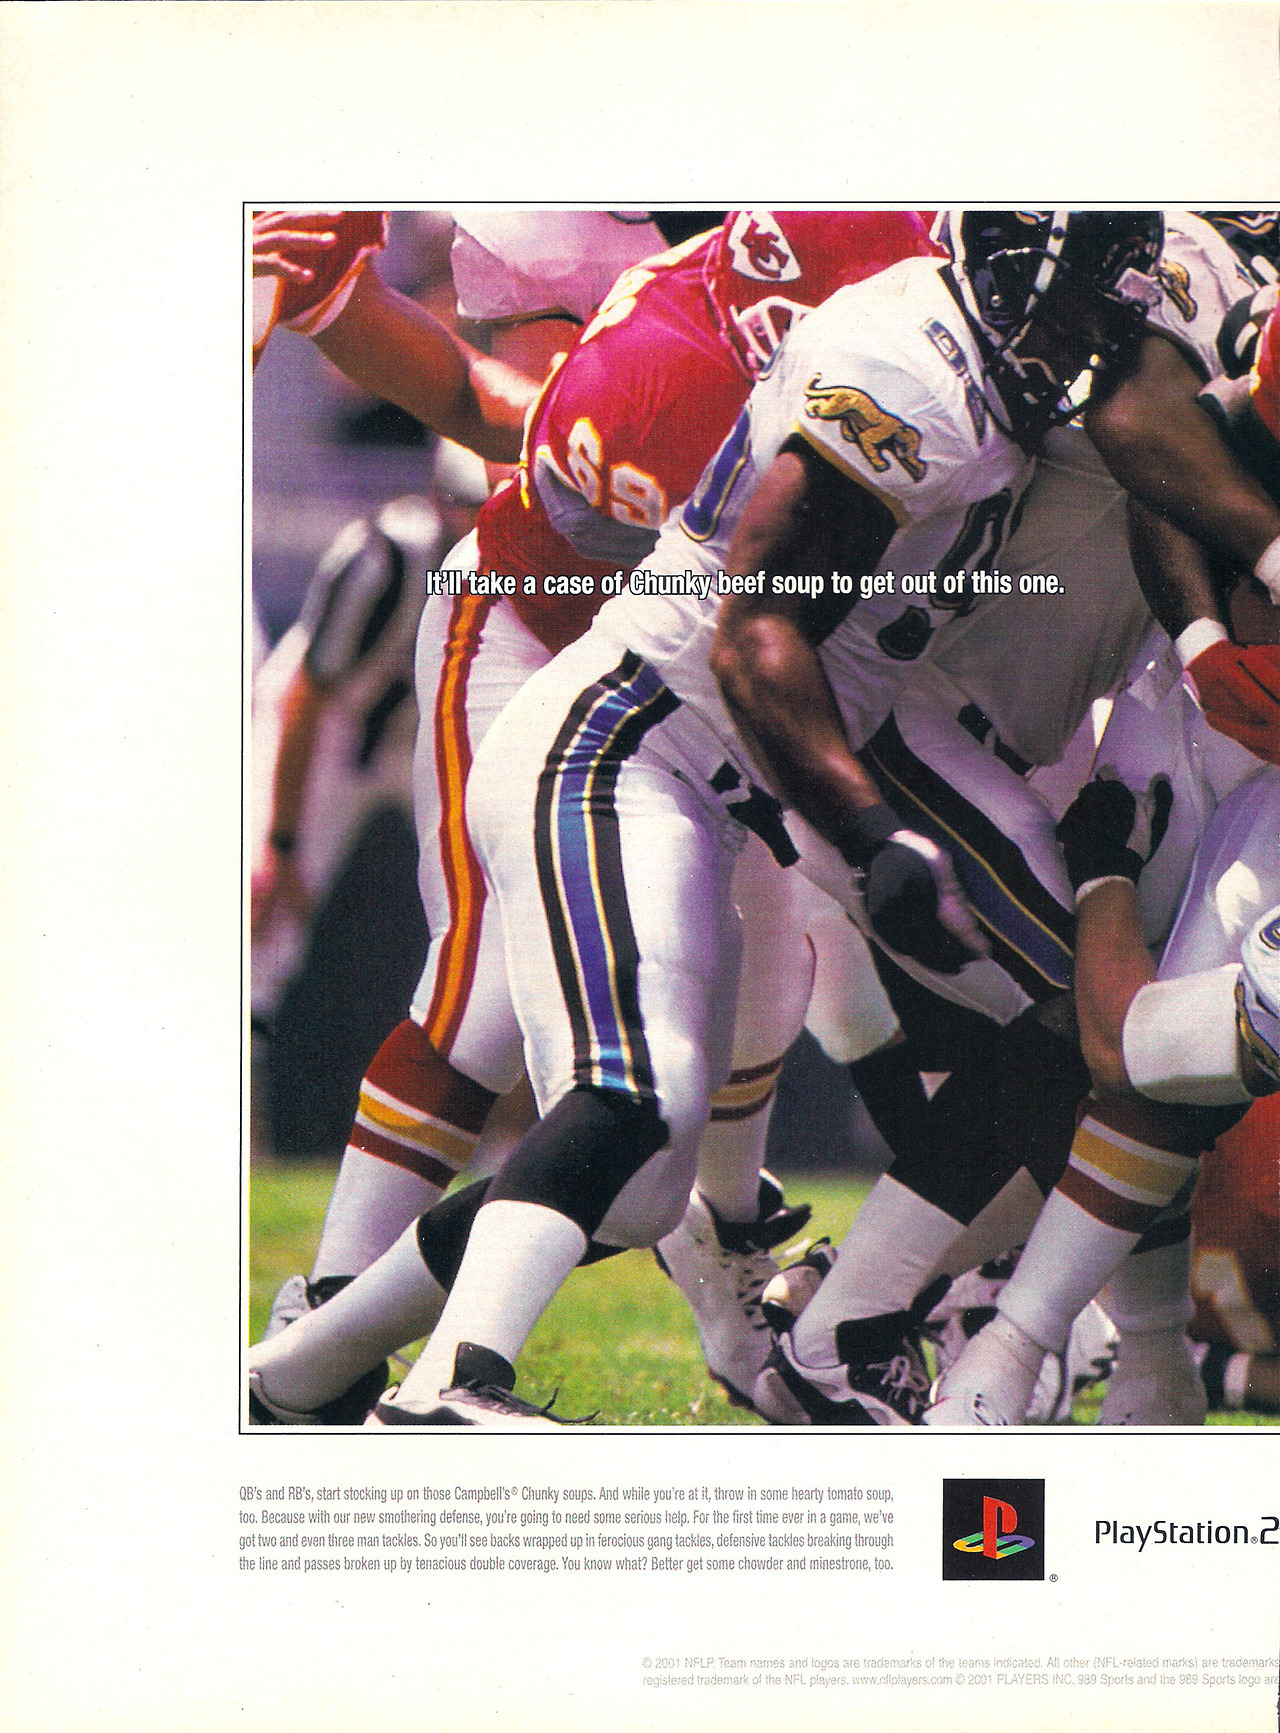 Video Game Print Ads — 'NFL GameDay 2002′ [PS1 / PS2] [USA] [MAGAZINE,